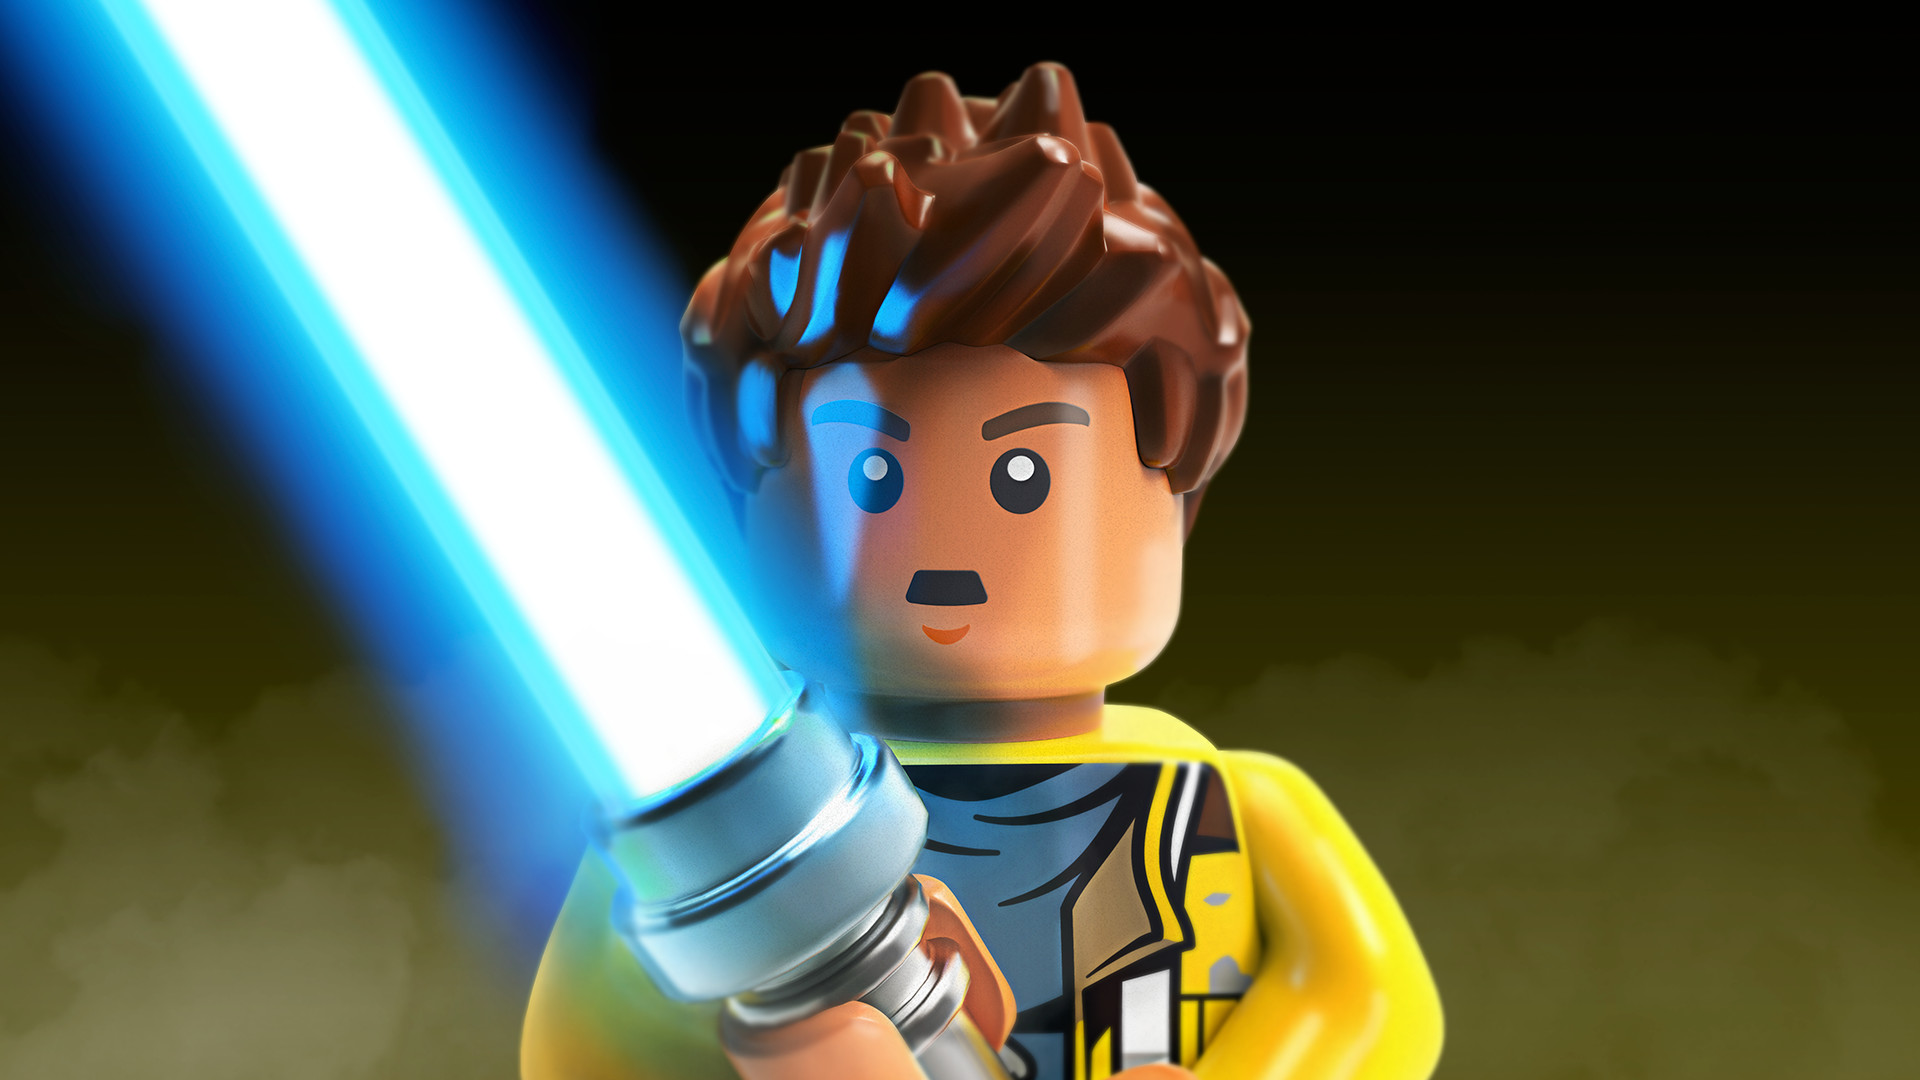 LEGO Star Wars: The Force Awakens - The Freemaker Adventures Character Pack DLC Steam CD Key $1.68